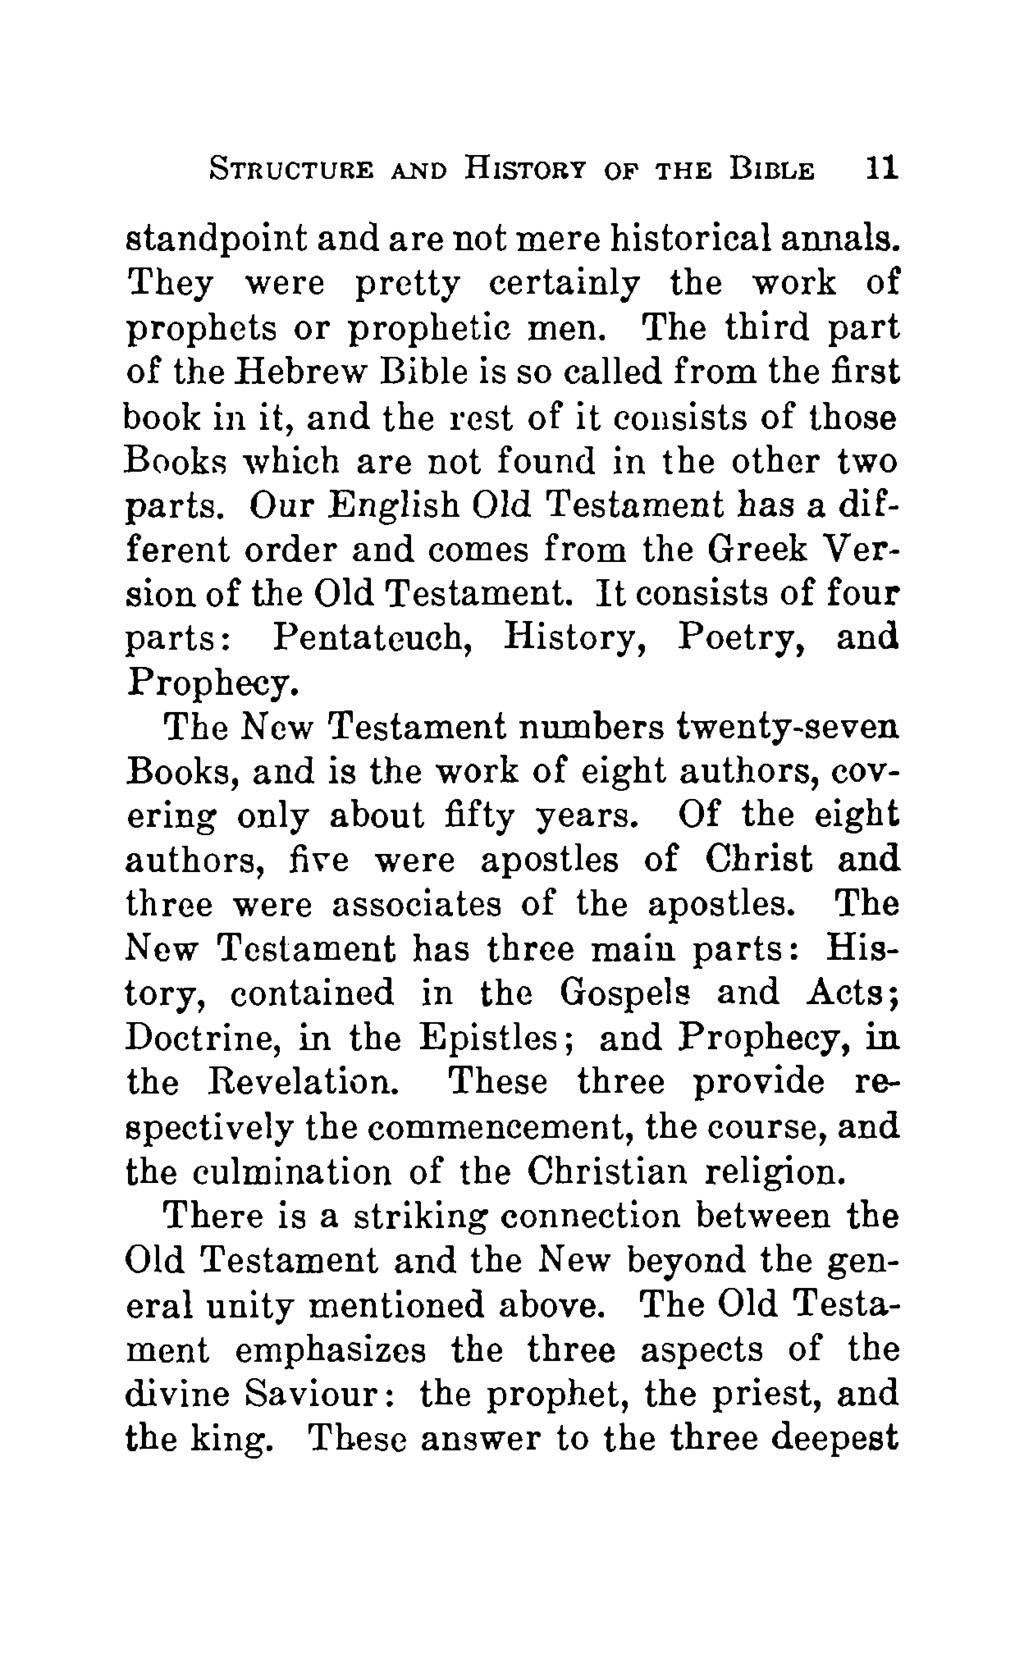 STRUCTURE AND HISTORY OF THE BIBLE 11 standpoint and are not mere historical annals. They were pretty certainly the work of prophets or prophetic men.